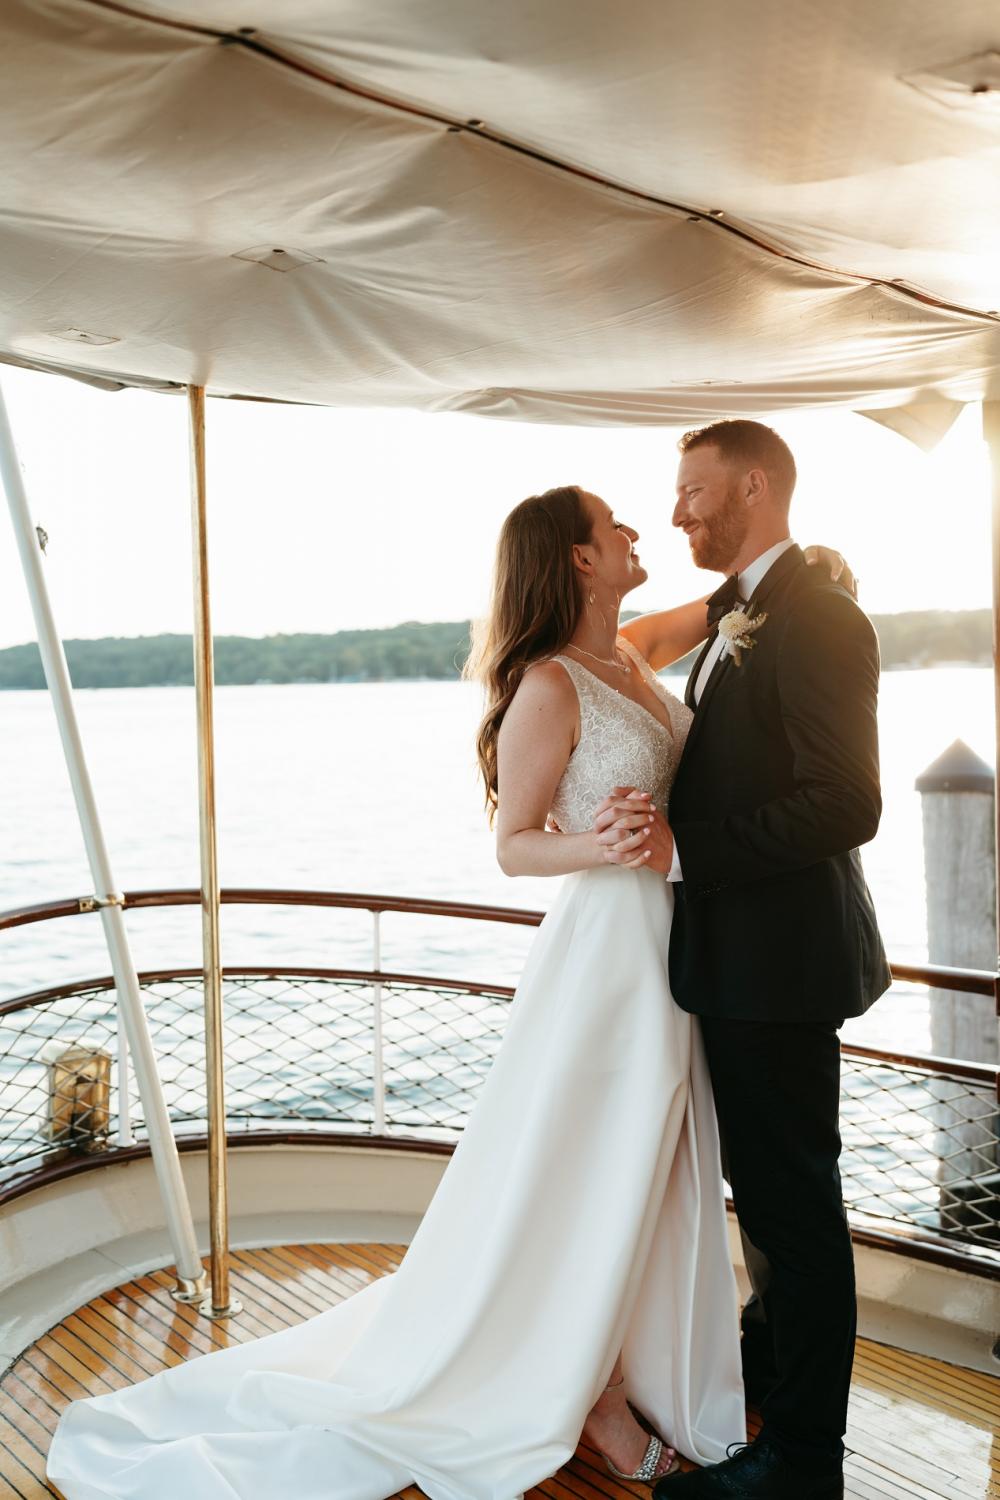 Fashionable bride with large straw hat lace cover up on yacht - Greg Finck  Photography